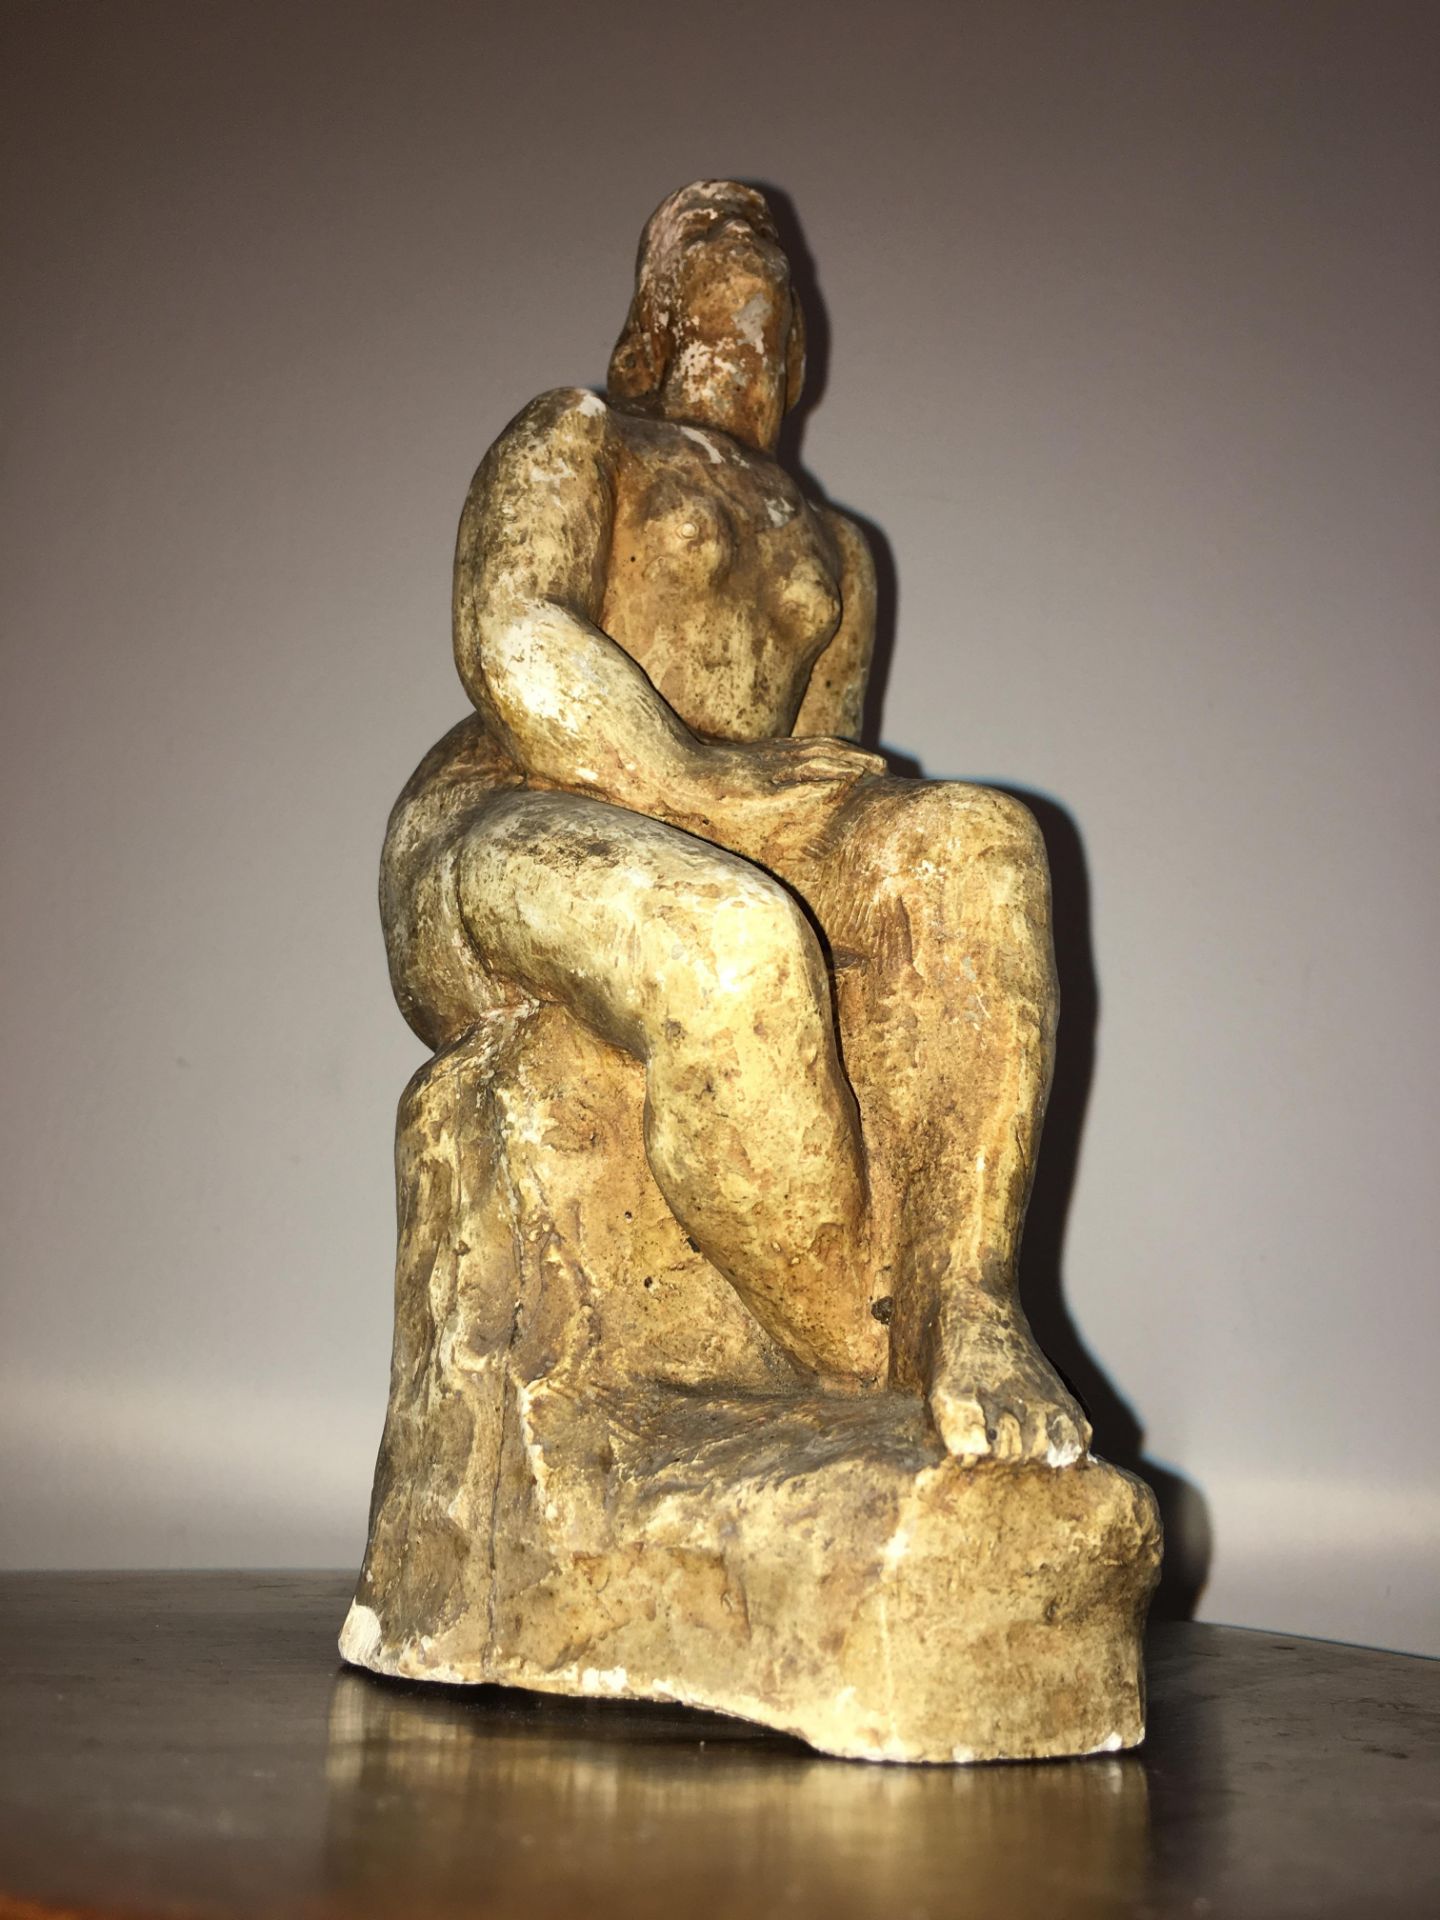 Seated female plaster sculpture signed by Marek Szwarc 1892-1958 - Image 5 of 7